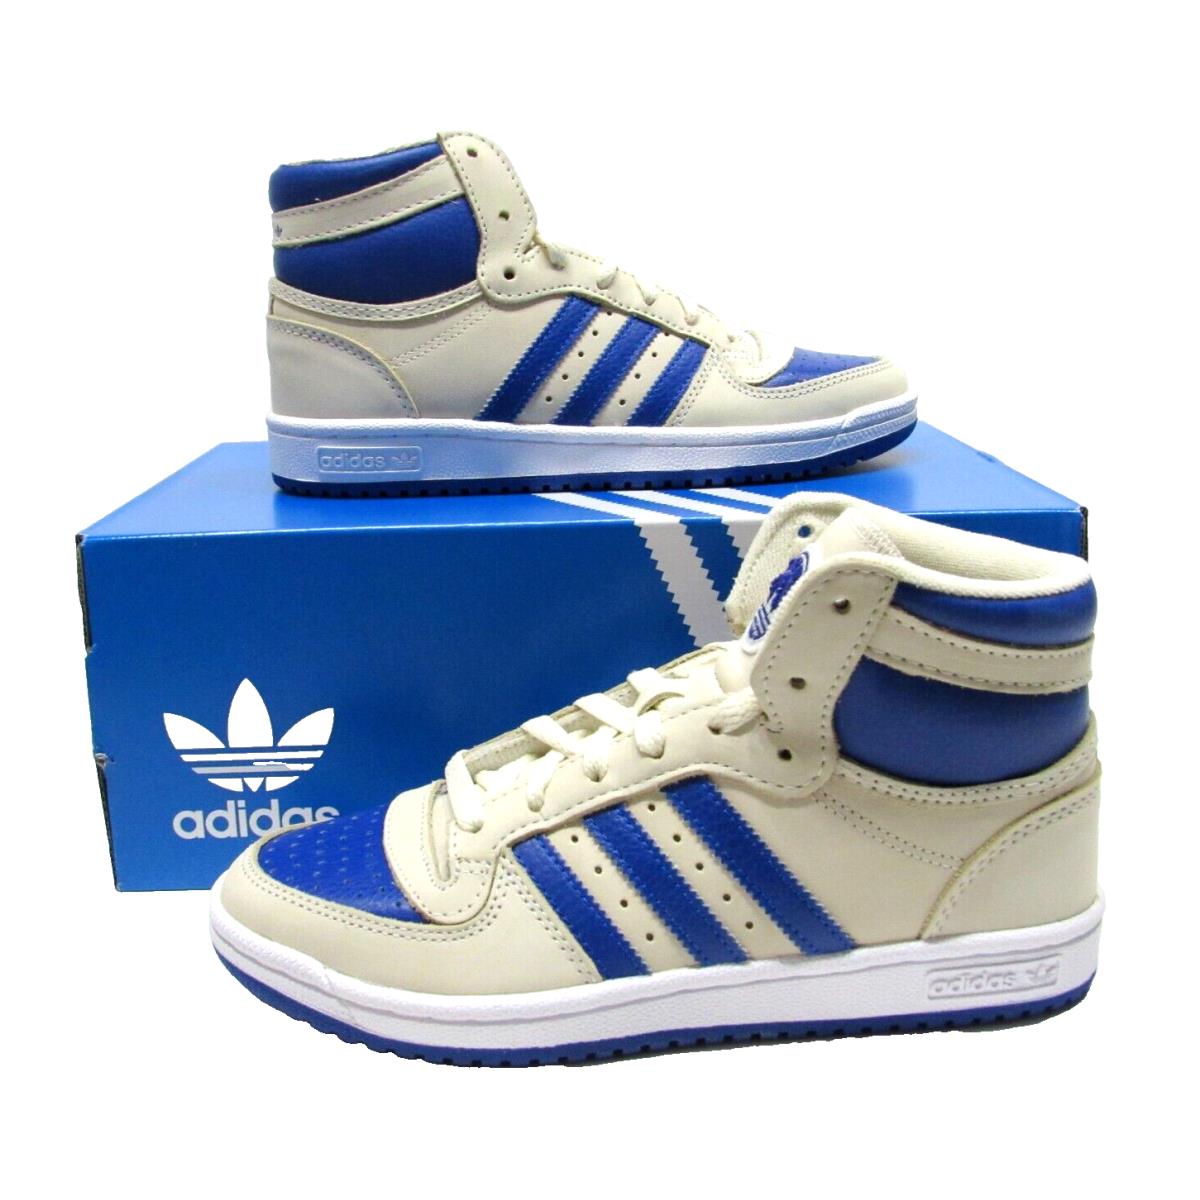 Adidas Top Ten RB Athletic Shoes Youth Boys sz 5 Cream White/royal Blue Leather